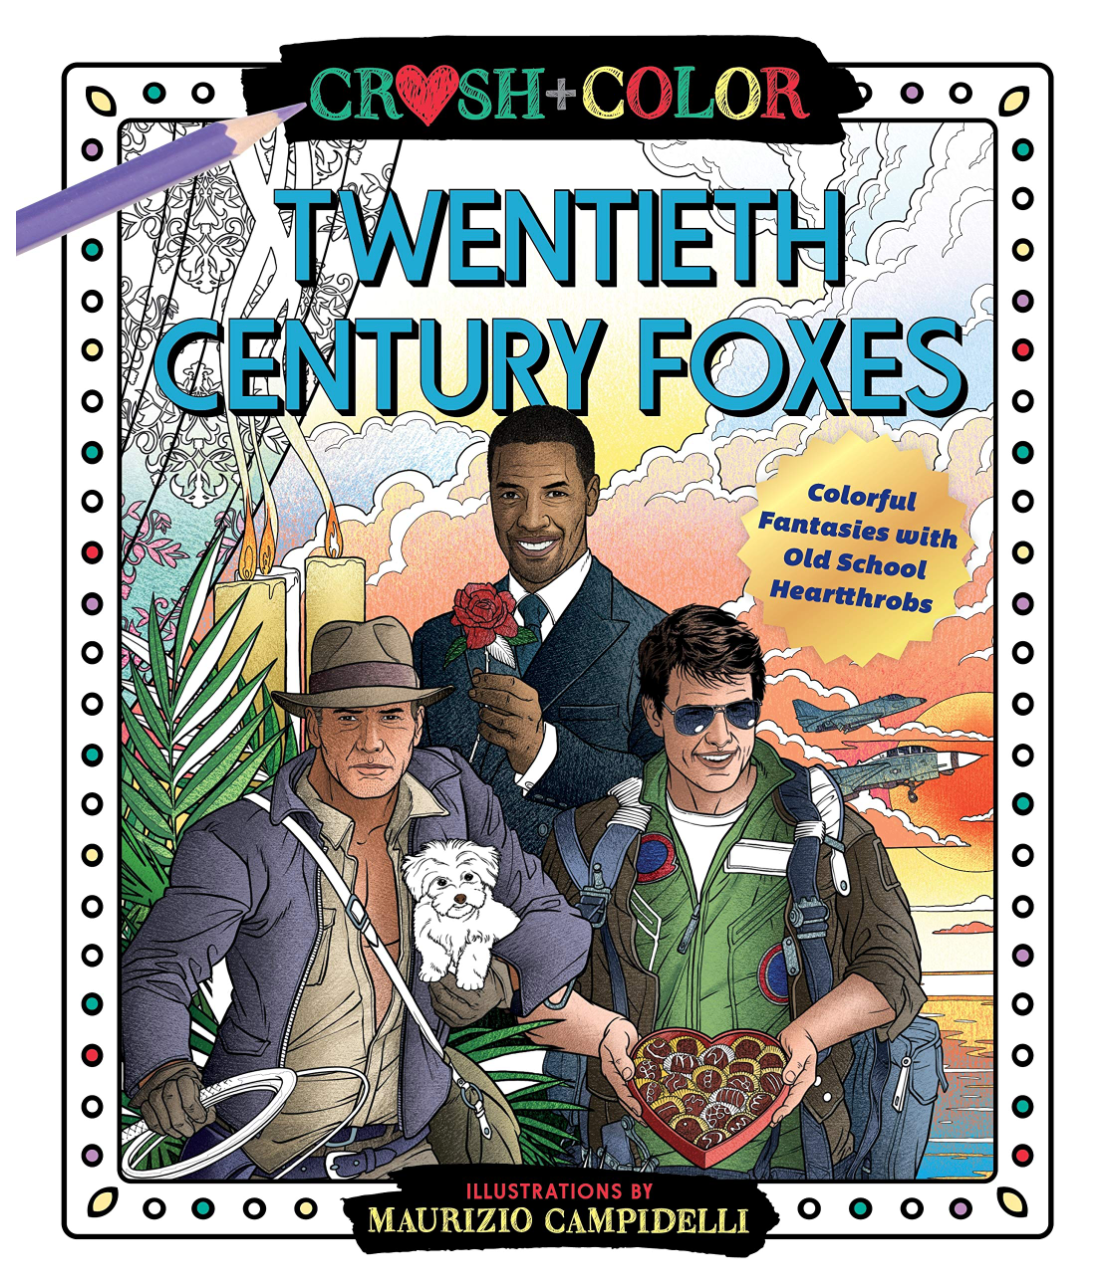 Twentieth Century Foxes: Colorful Fantasies with Old-School Heart Throbs (Crush & Color)